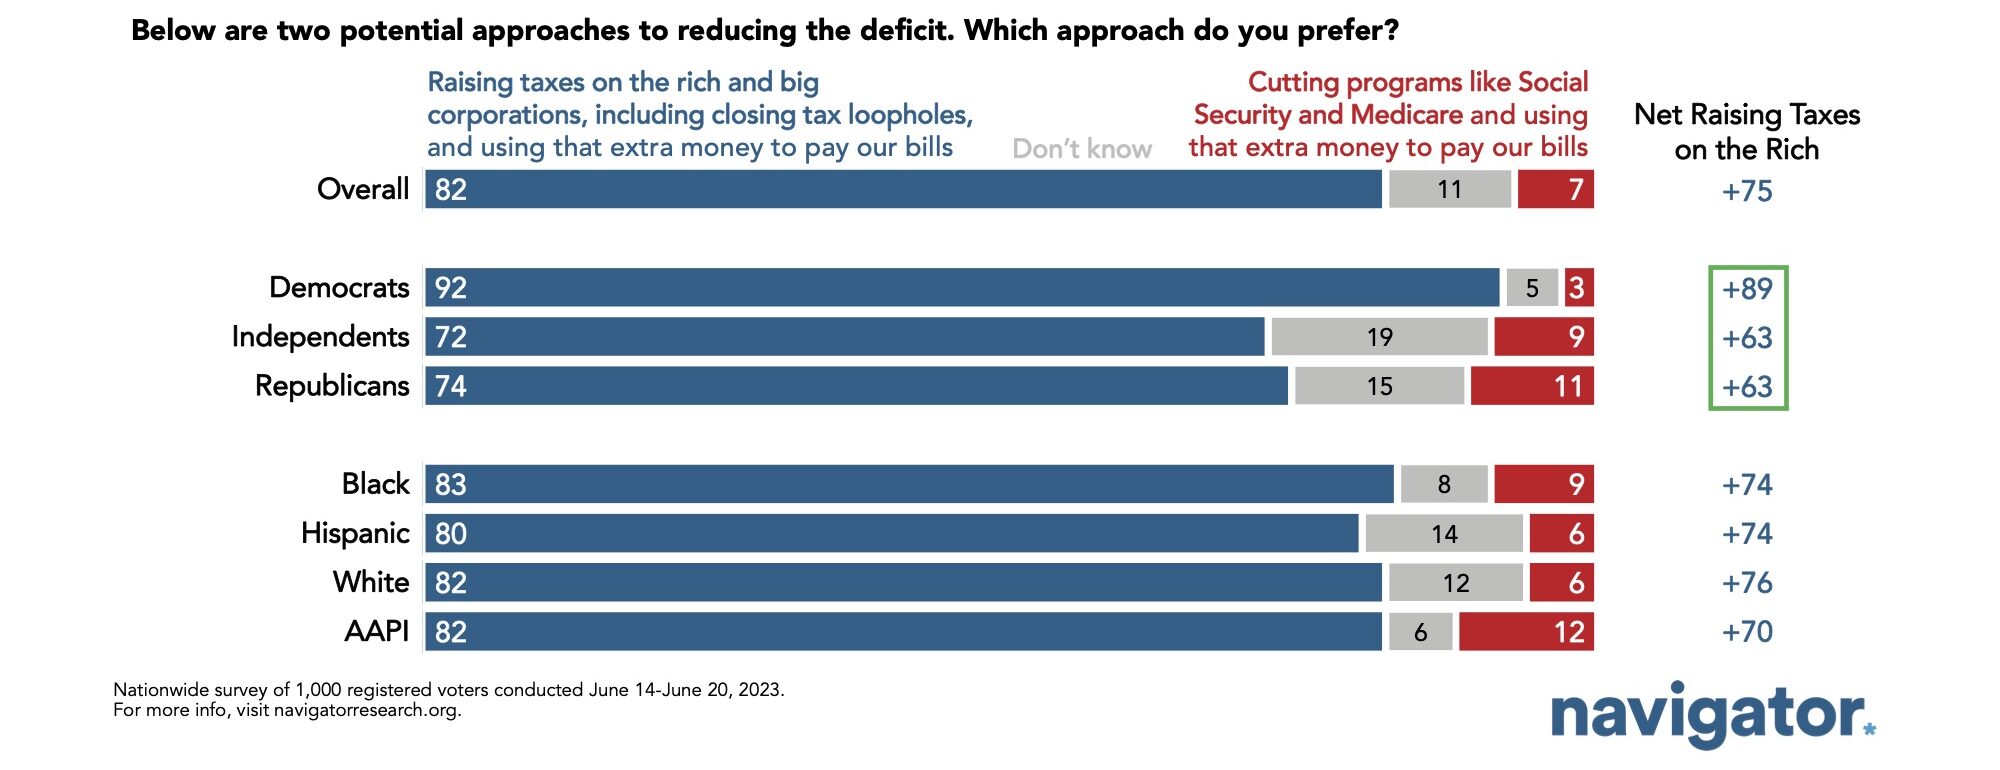 Bar graphs showing survey results to the following question: Below are two potential approaches to reducing the deficit. Which approach do you prefer? 1. Raising taxes on the rich and big corporations, including closing tax loopholes, and using that extra money to pay our bills 2. Cutting programs like Social Security and Medicare and using that extra money to pay our bills